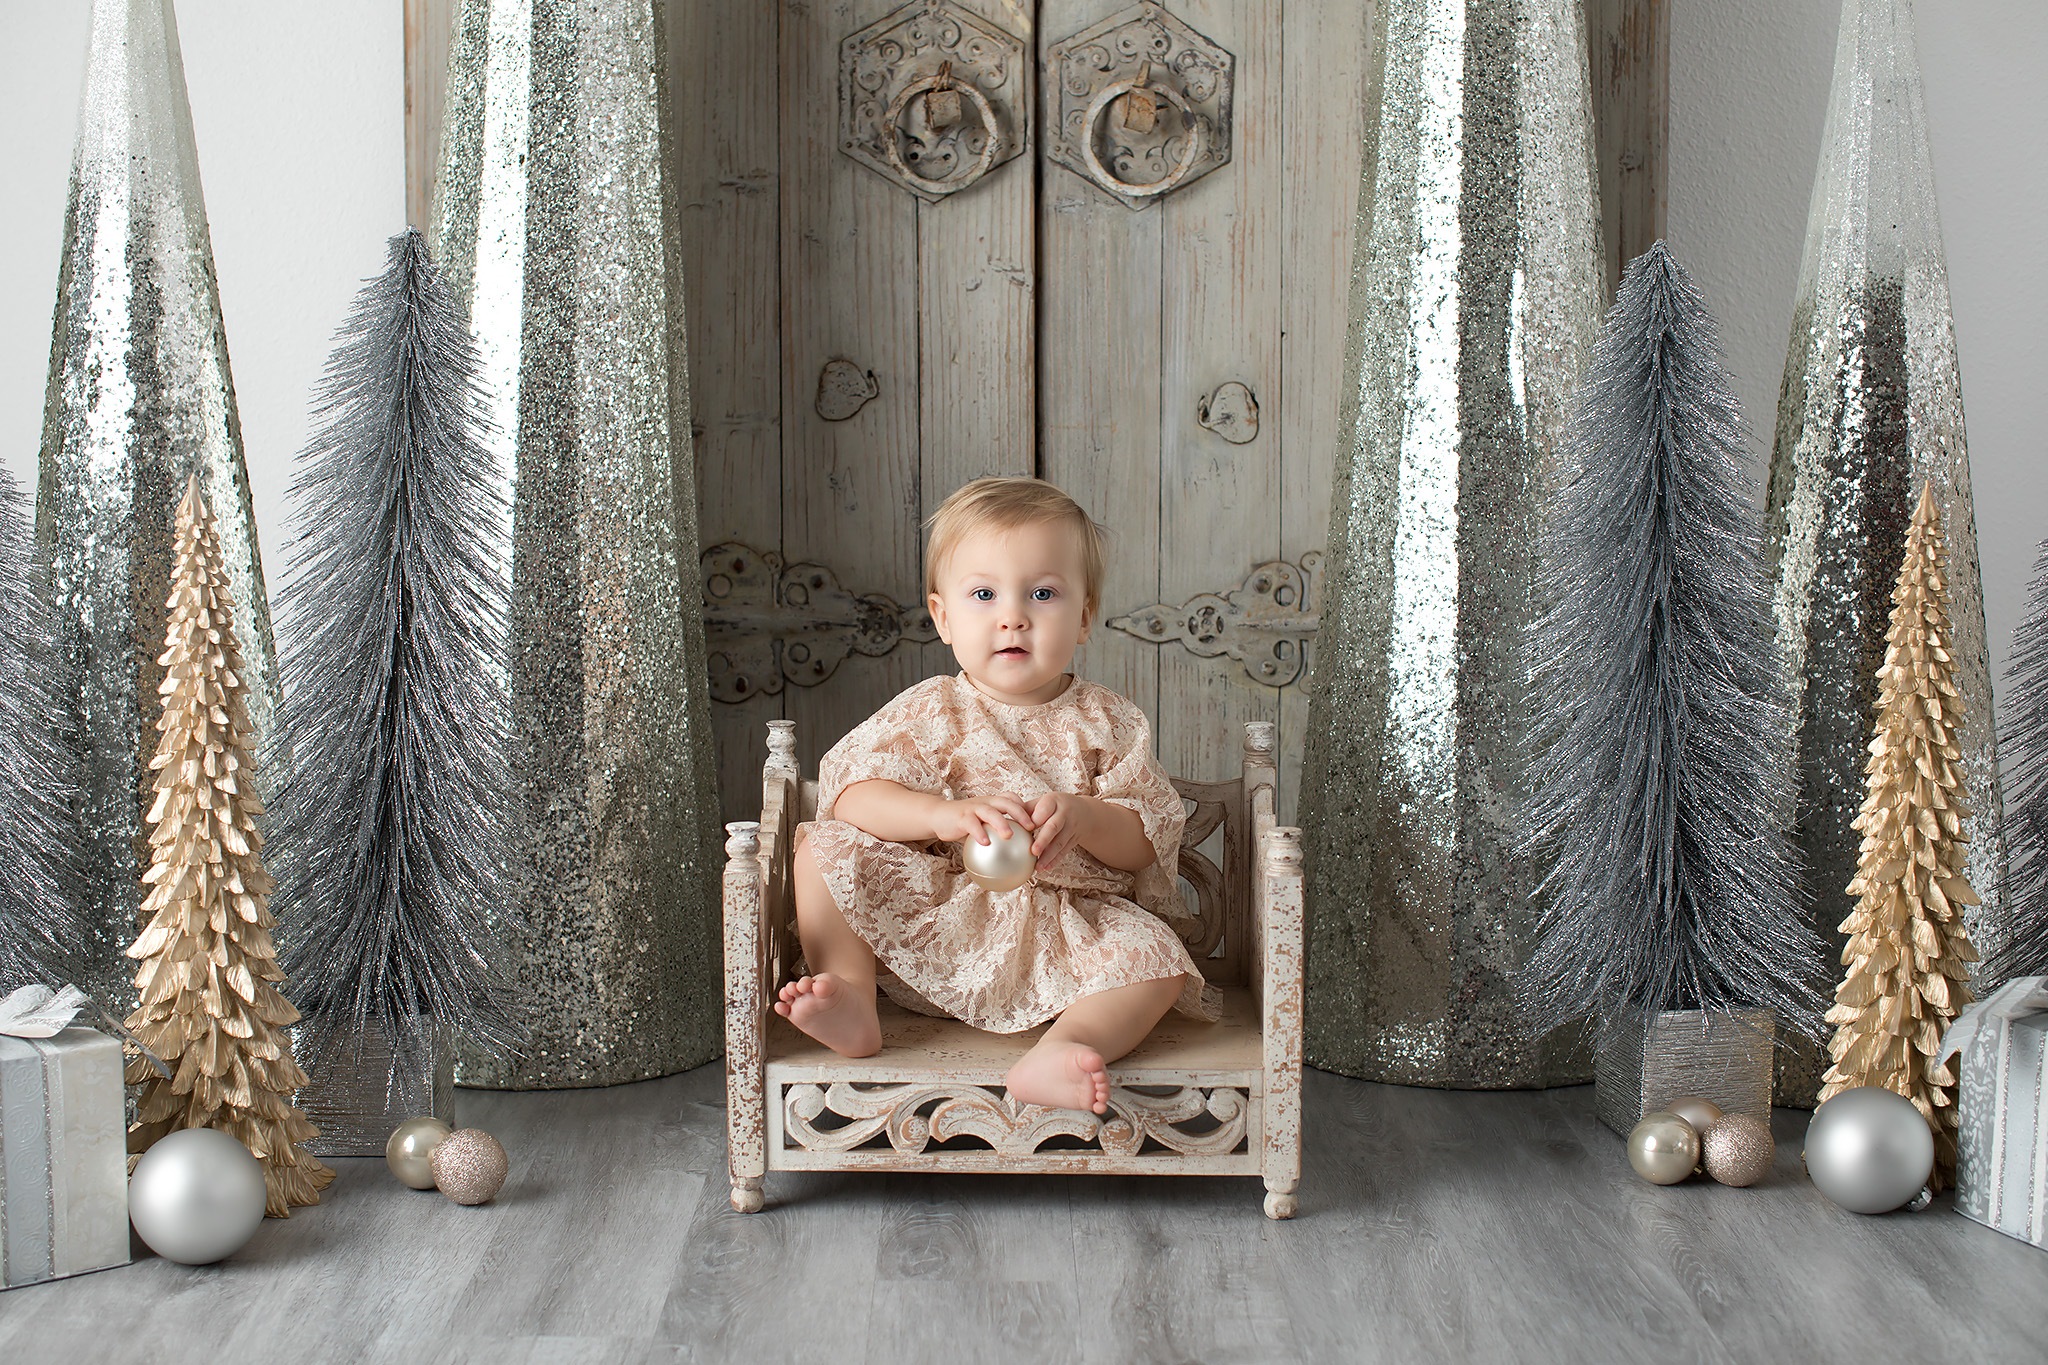 Exclusive Holiday Portrait Sessions